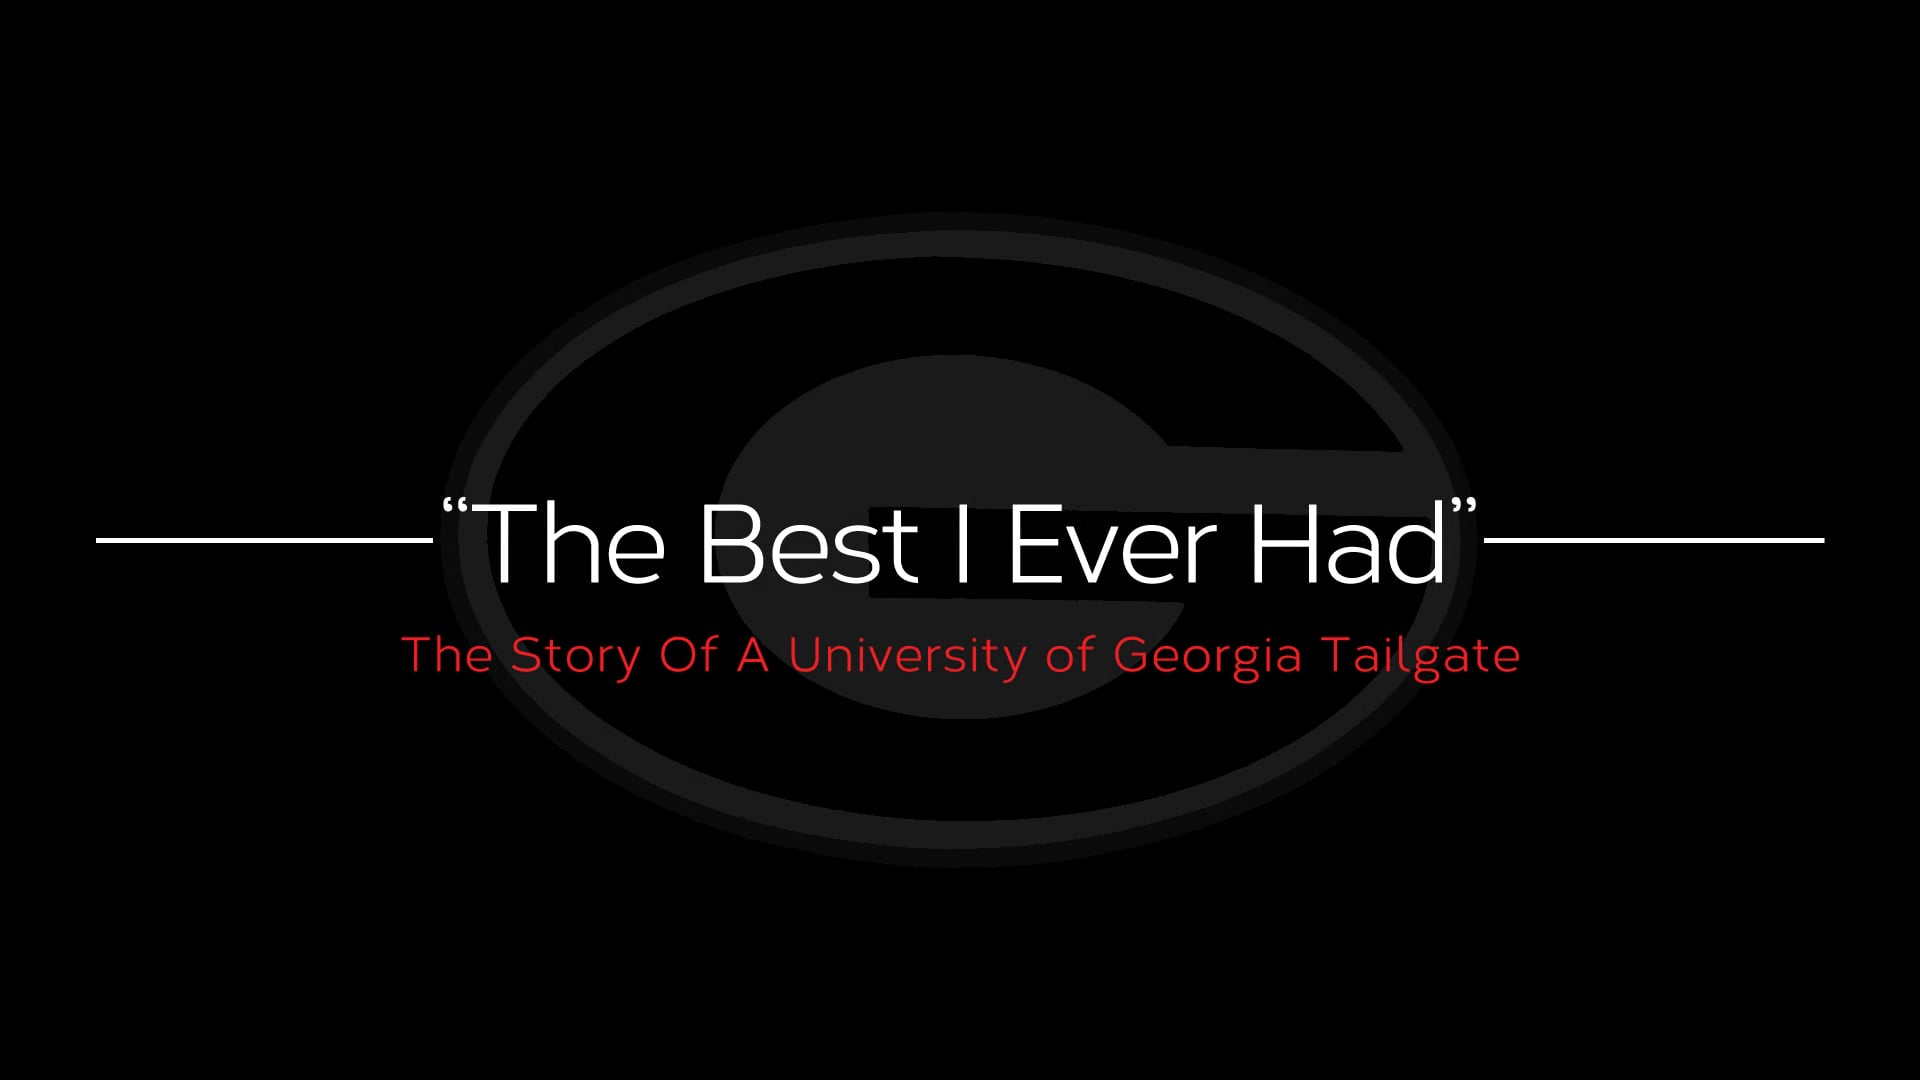 "The Best I Ever Had: A Story of a University of Georgia Tailgate"